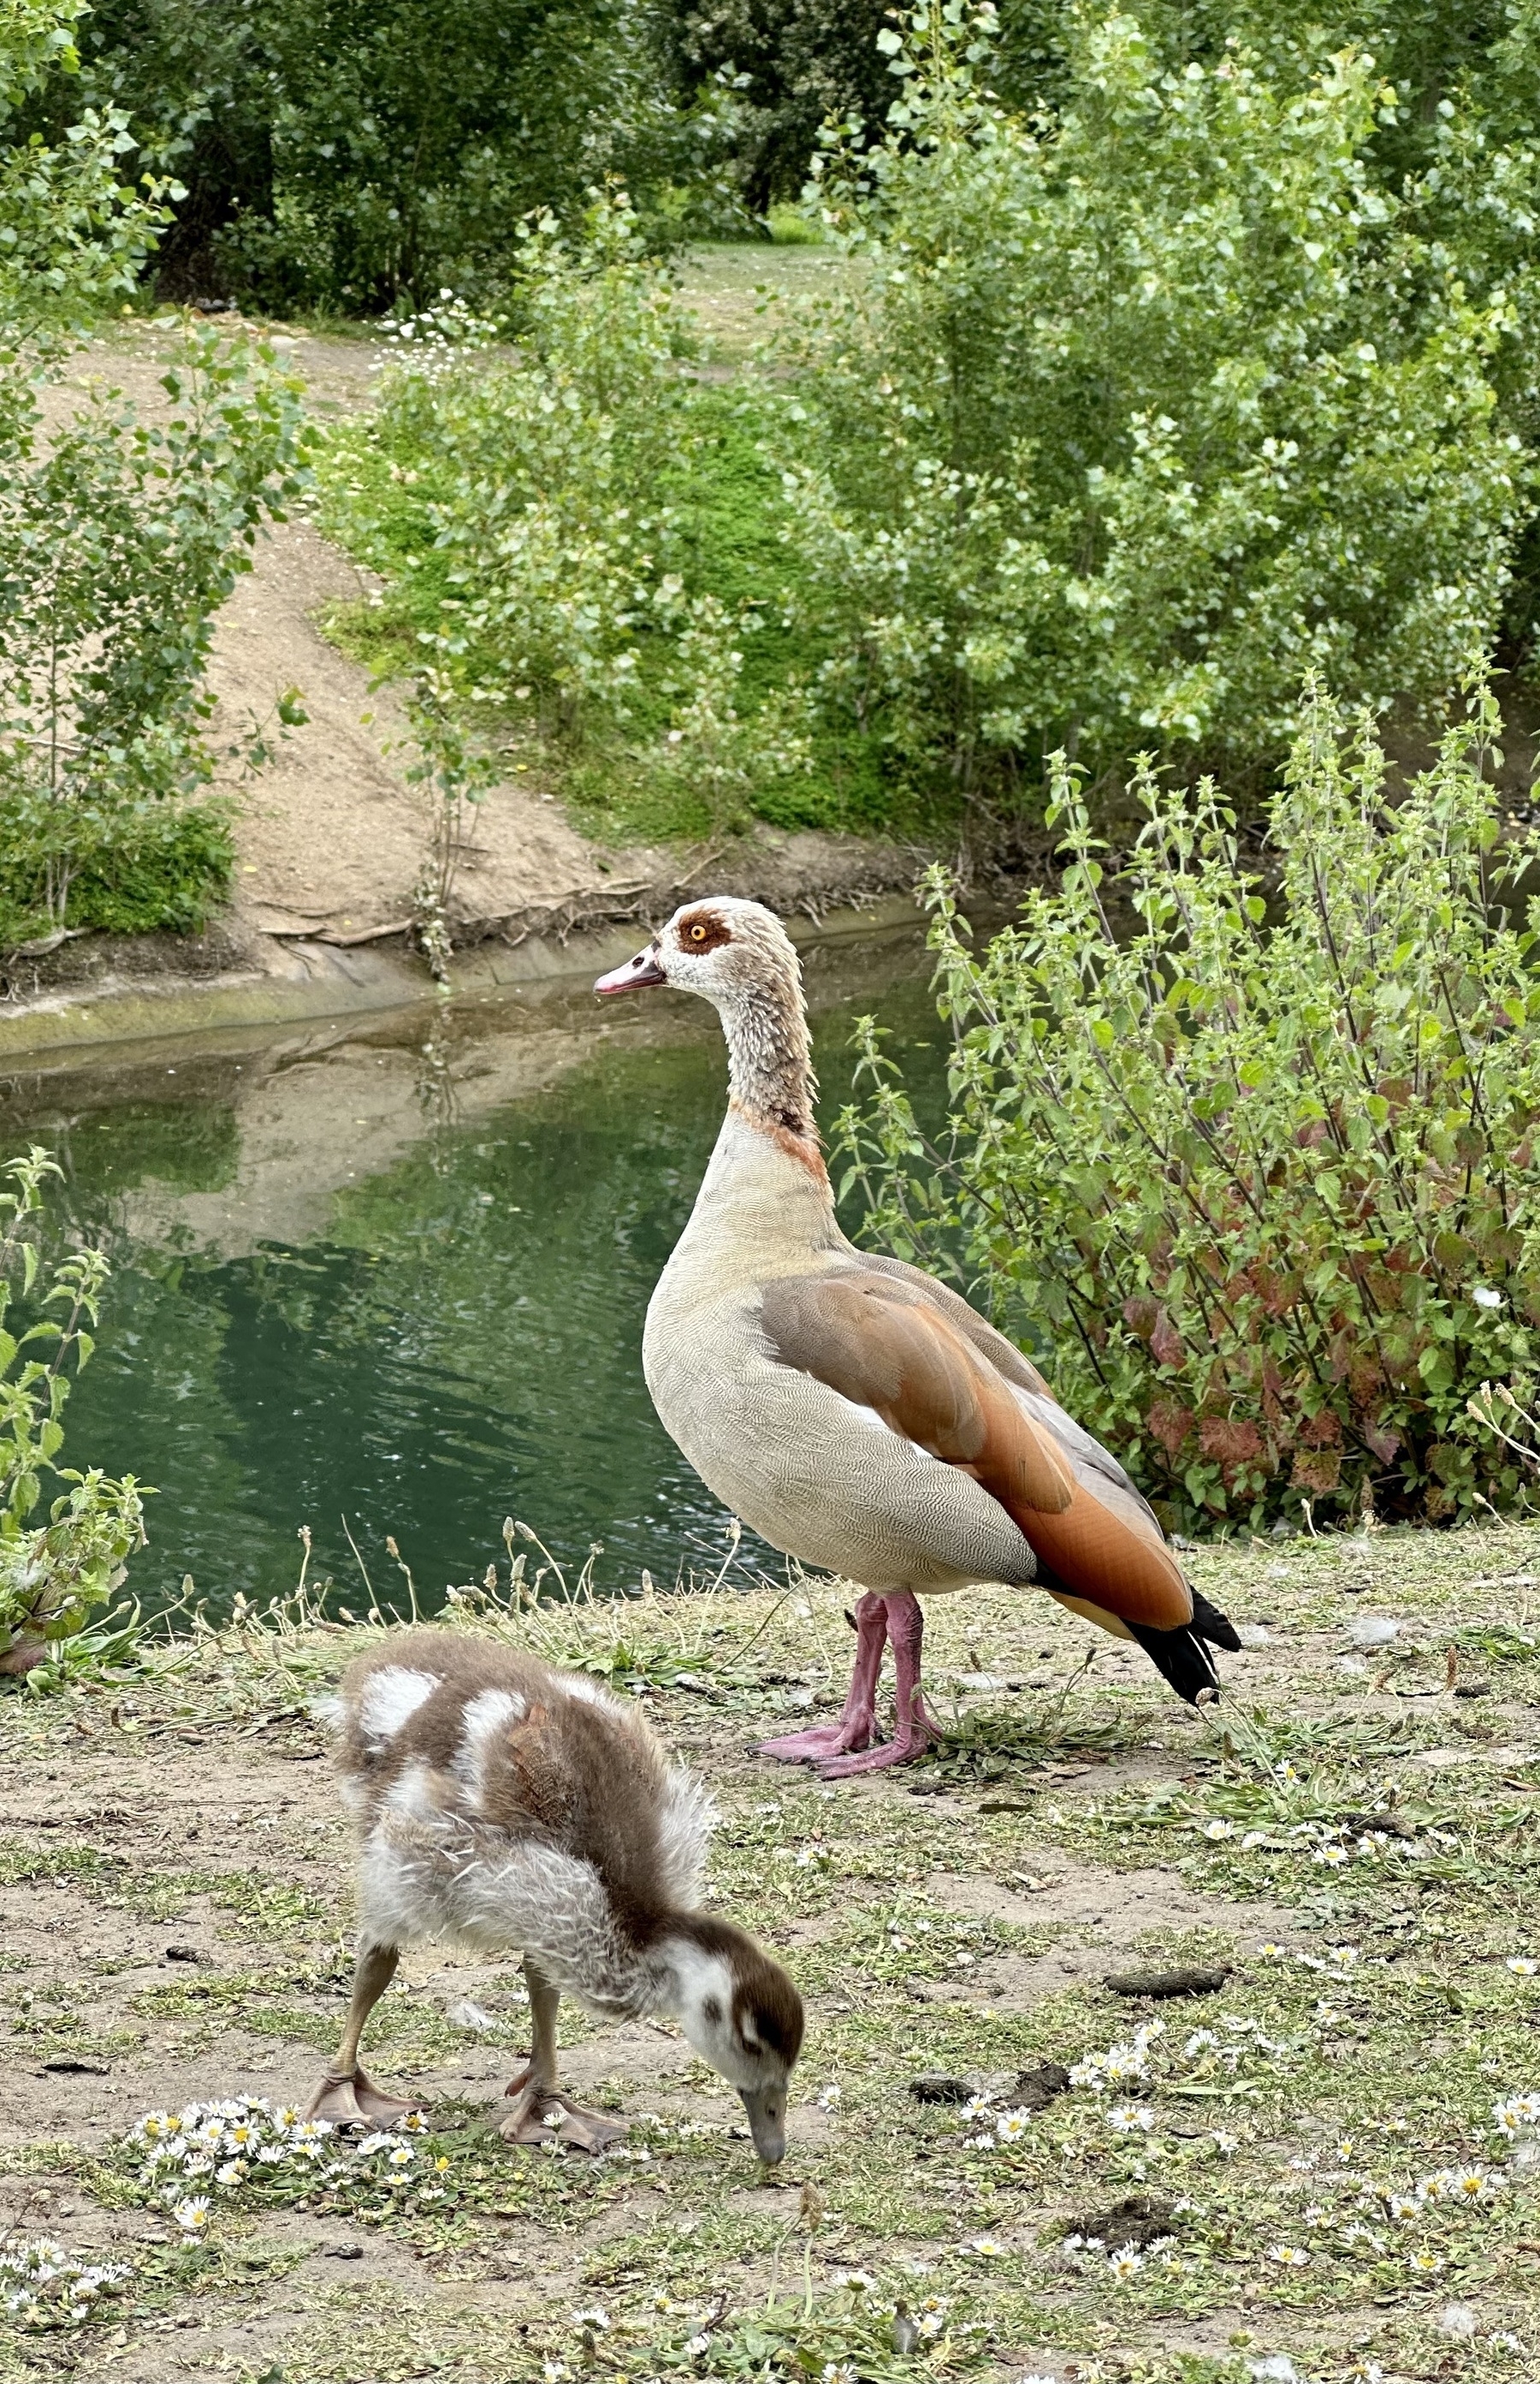 An Egyptian goose standing on the bank of a lake, with a gosling in front of it.